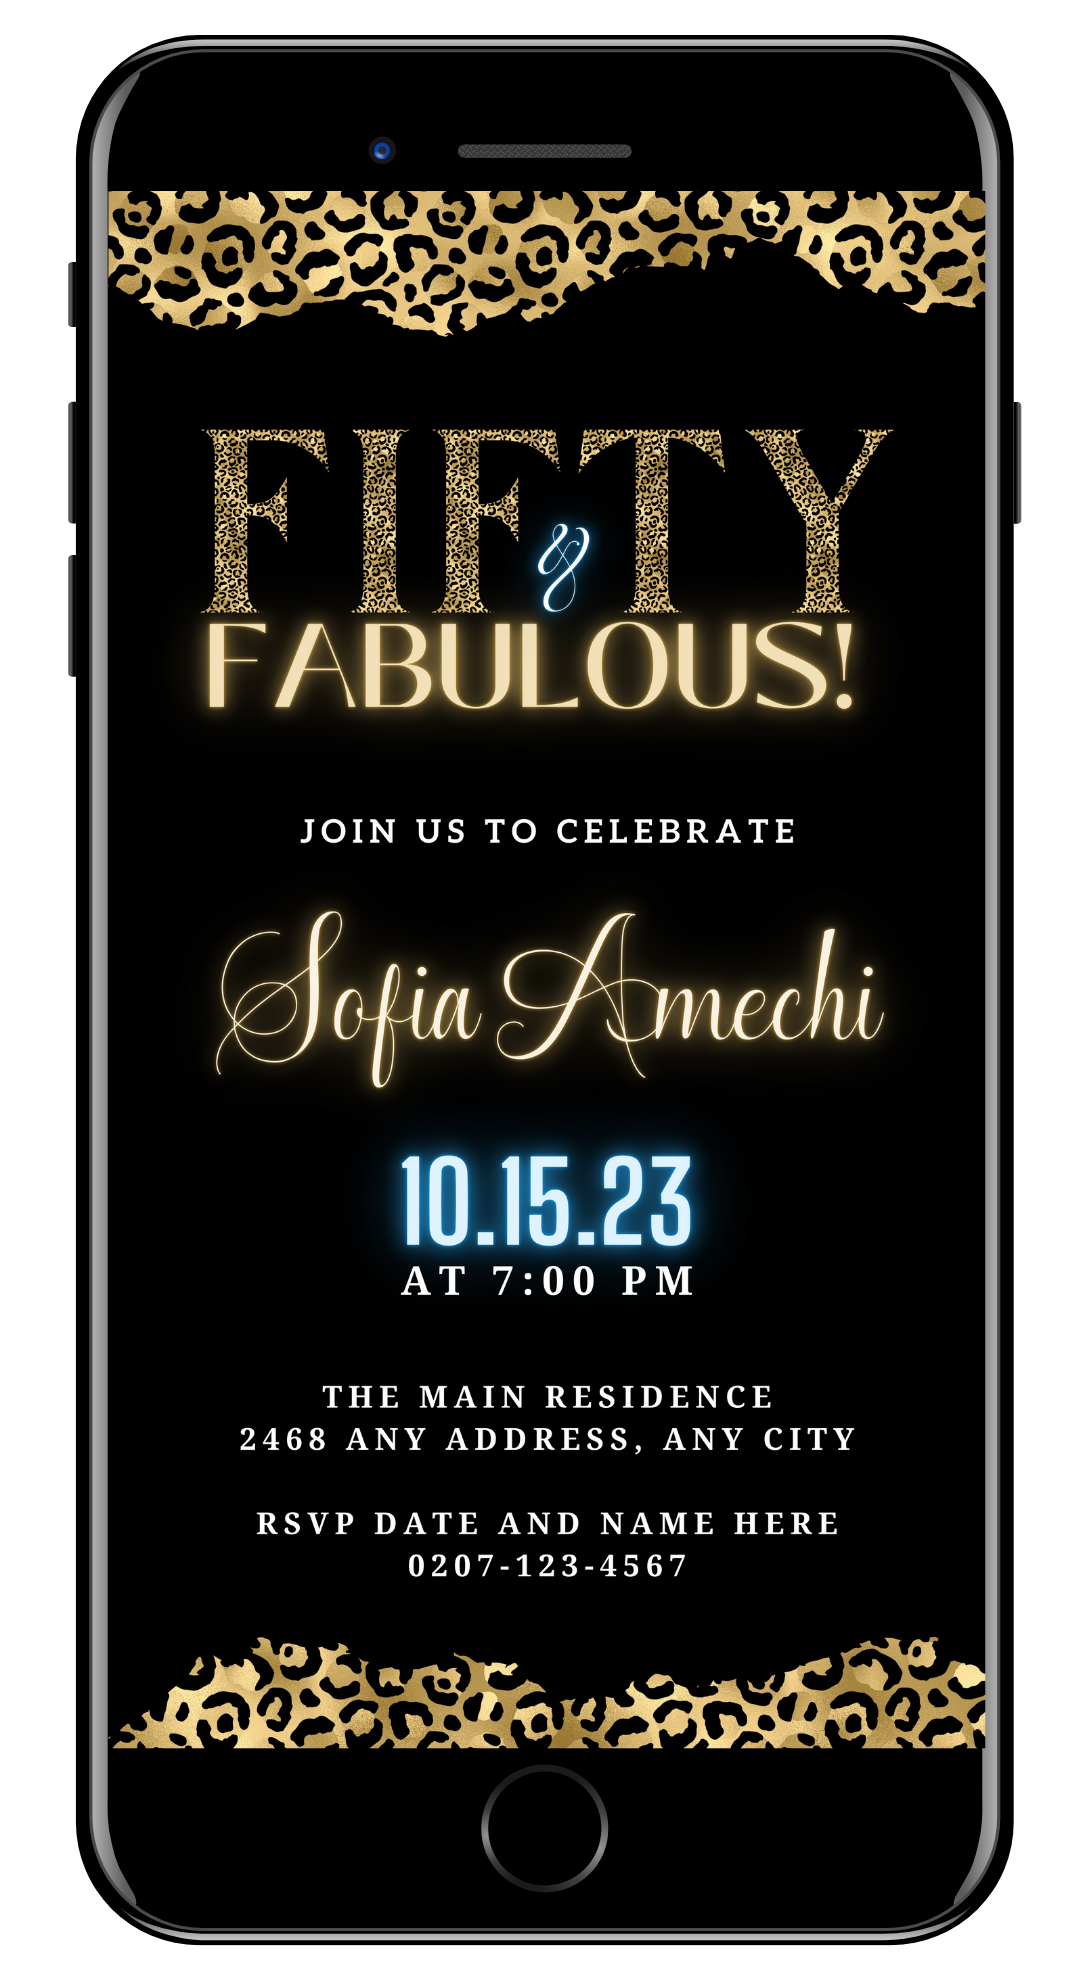 Elegant Gold Neon Black Leopard | Fifty & Fabulous Party Evite featuring customizable gold text on a black background with leopard print accents, designed for digital invitations.